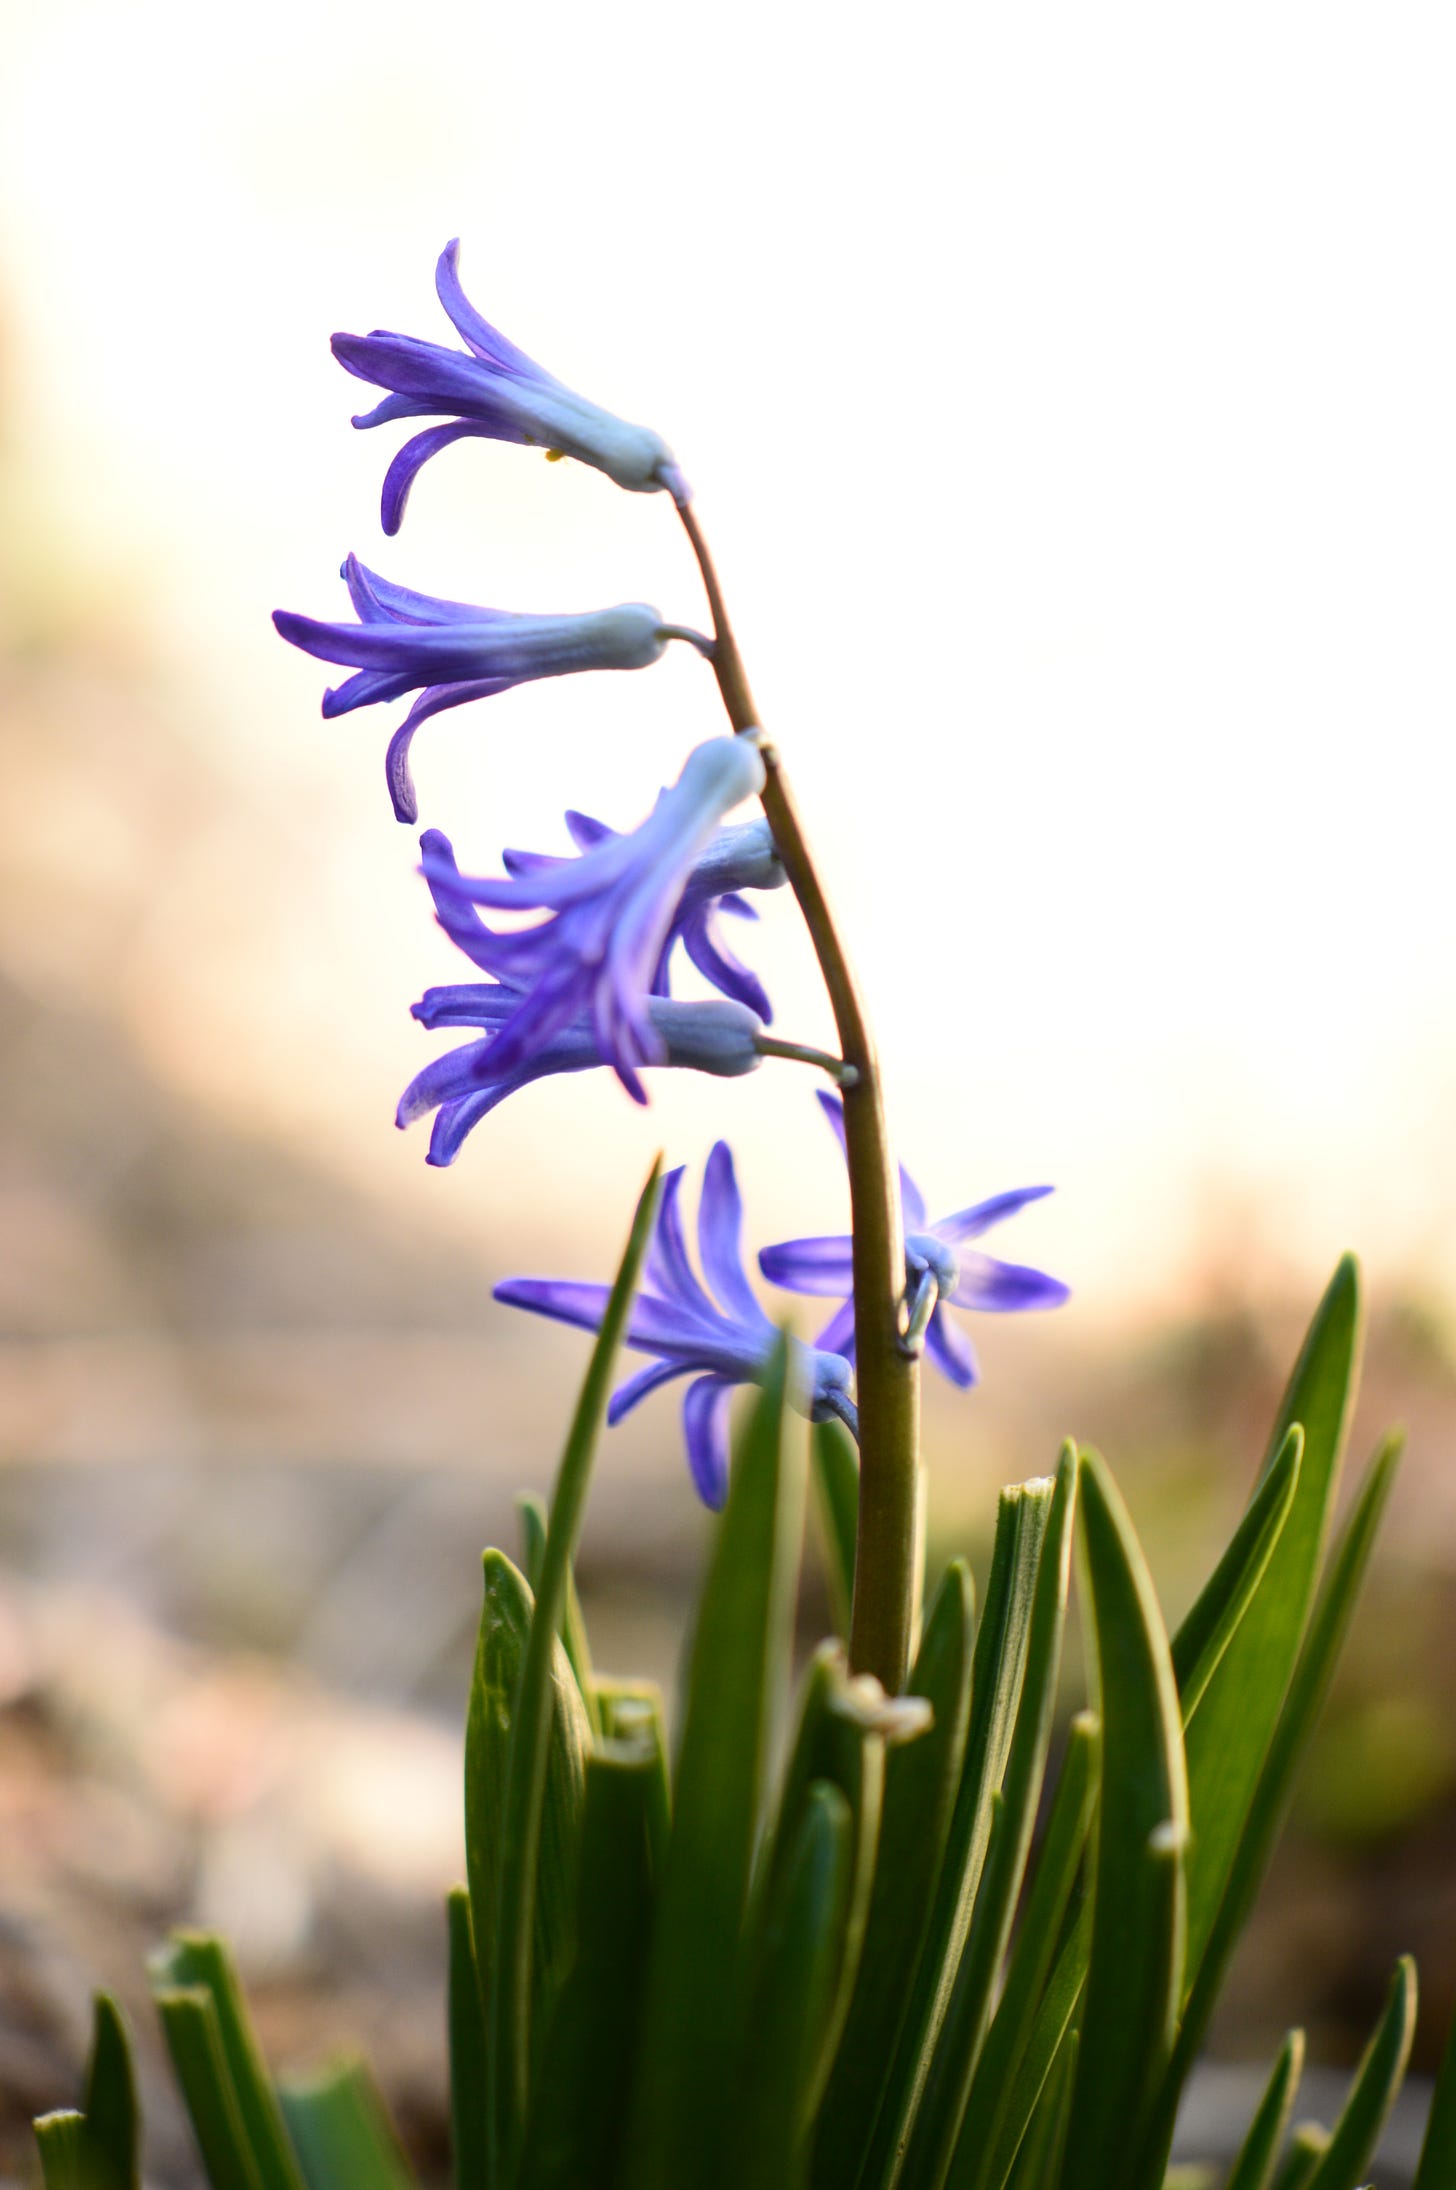 a stem of Roman hyacinths with the florets in profile against a light background